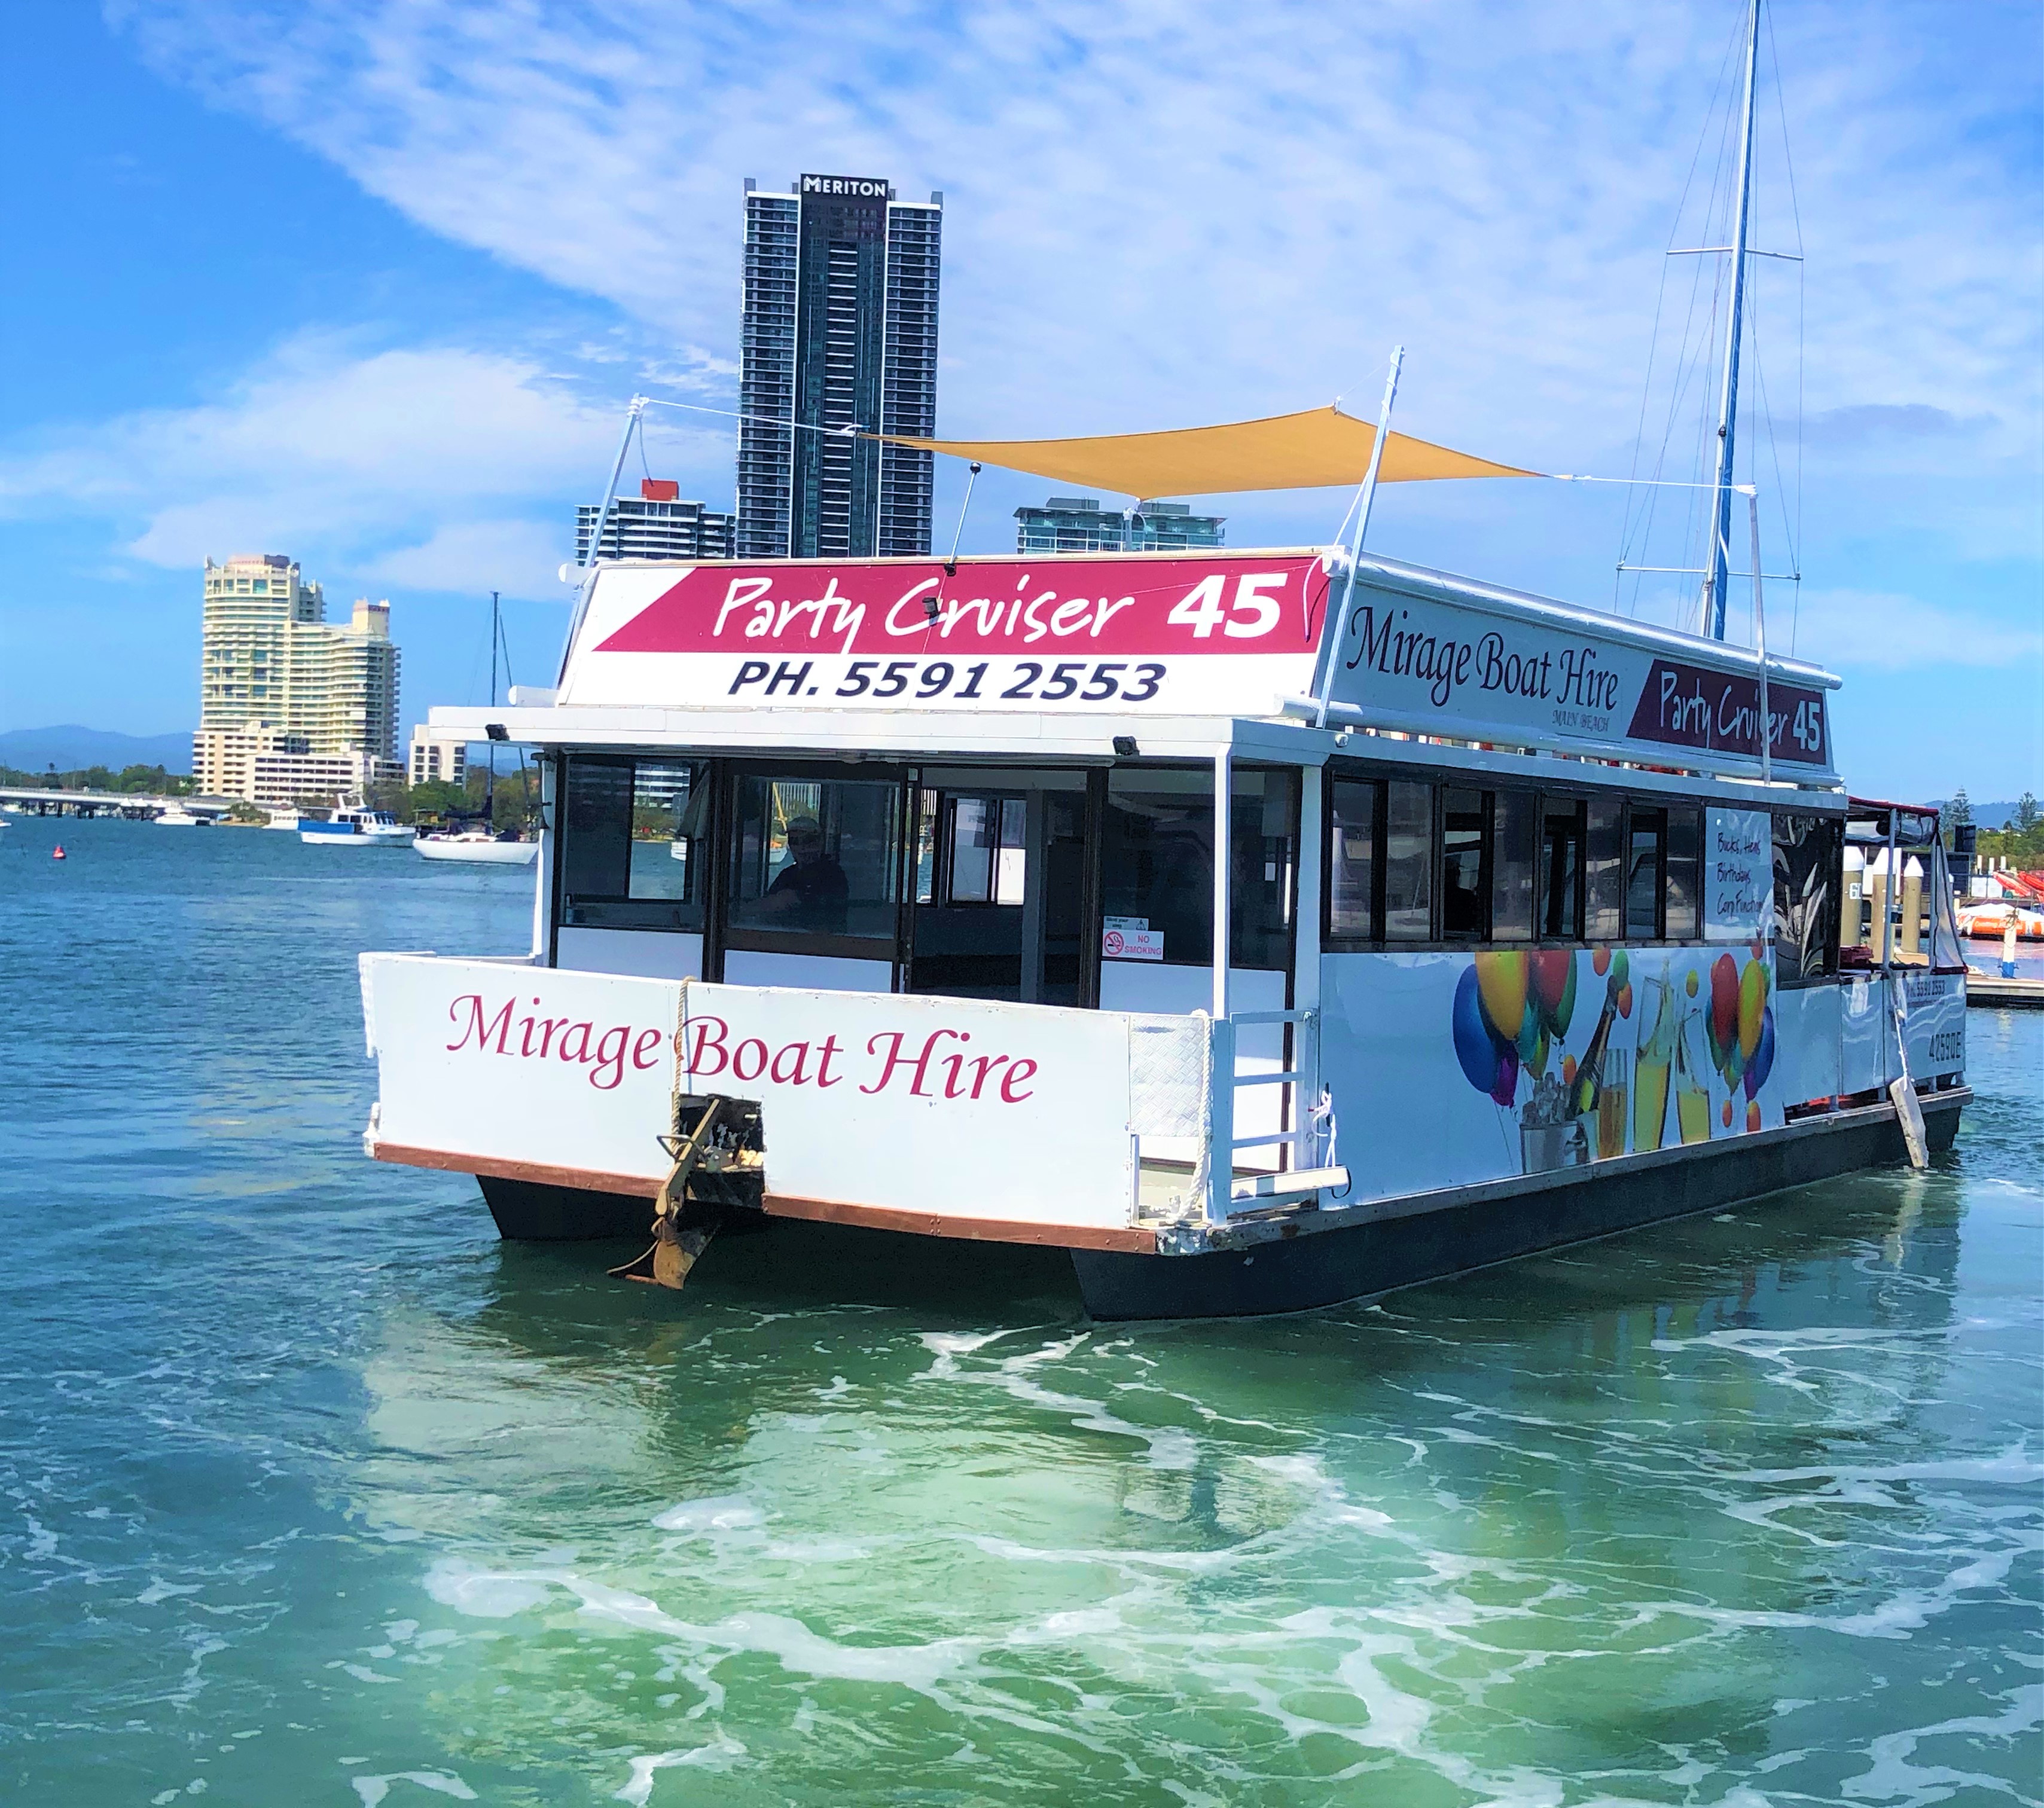 Mirage Boat Hire - Find Attractions 1